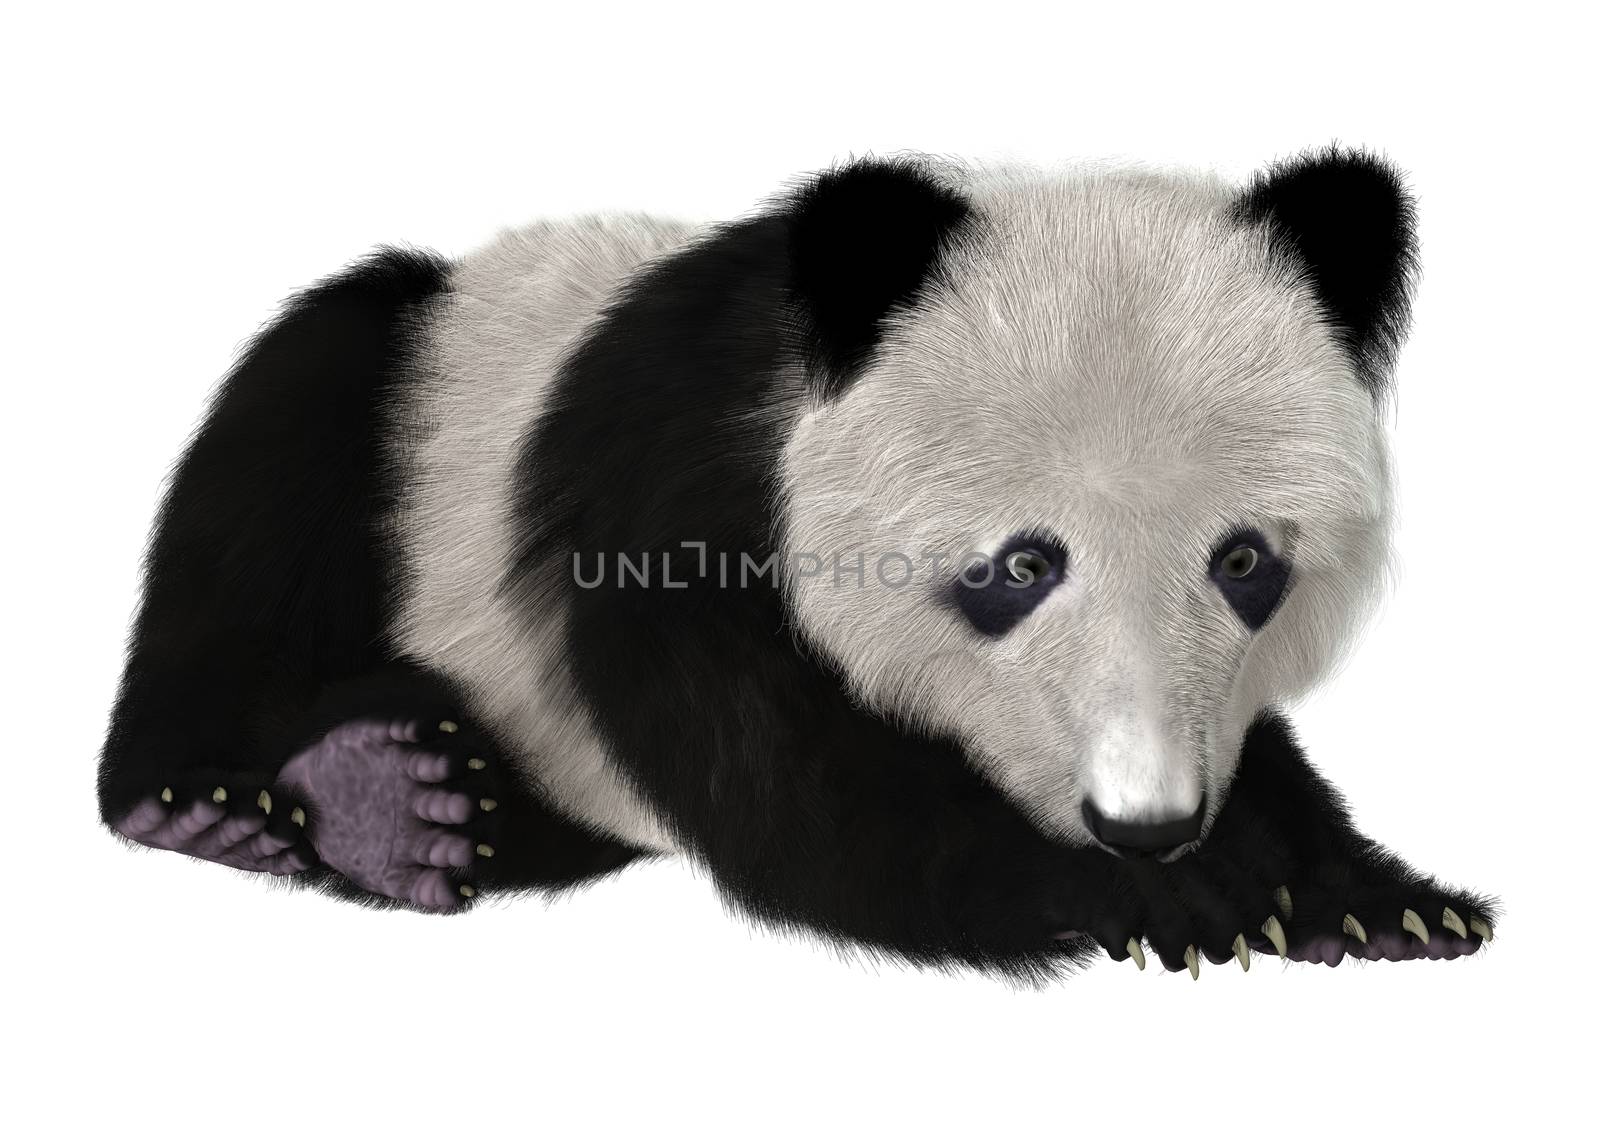 3D digital render of a panda bear cub resting isolated on white background